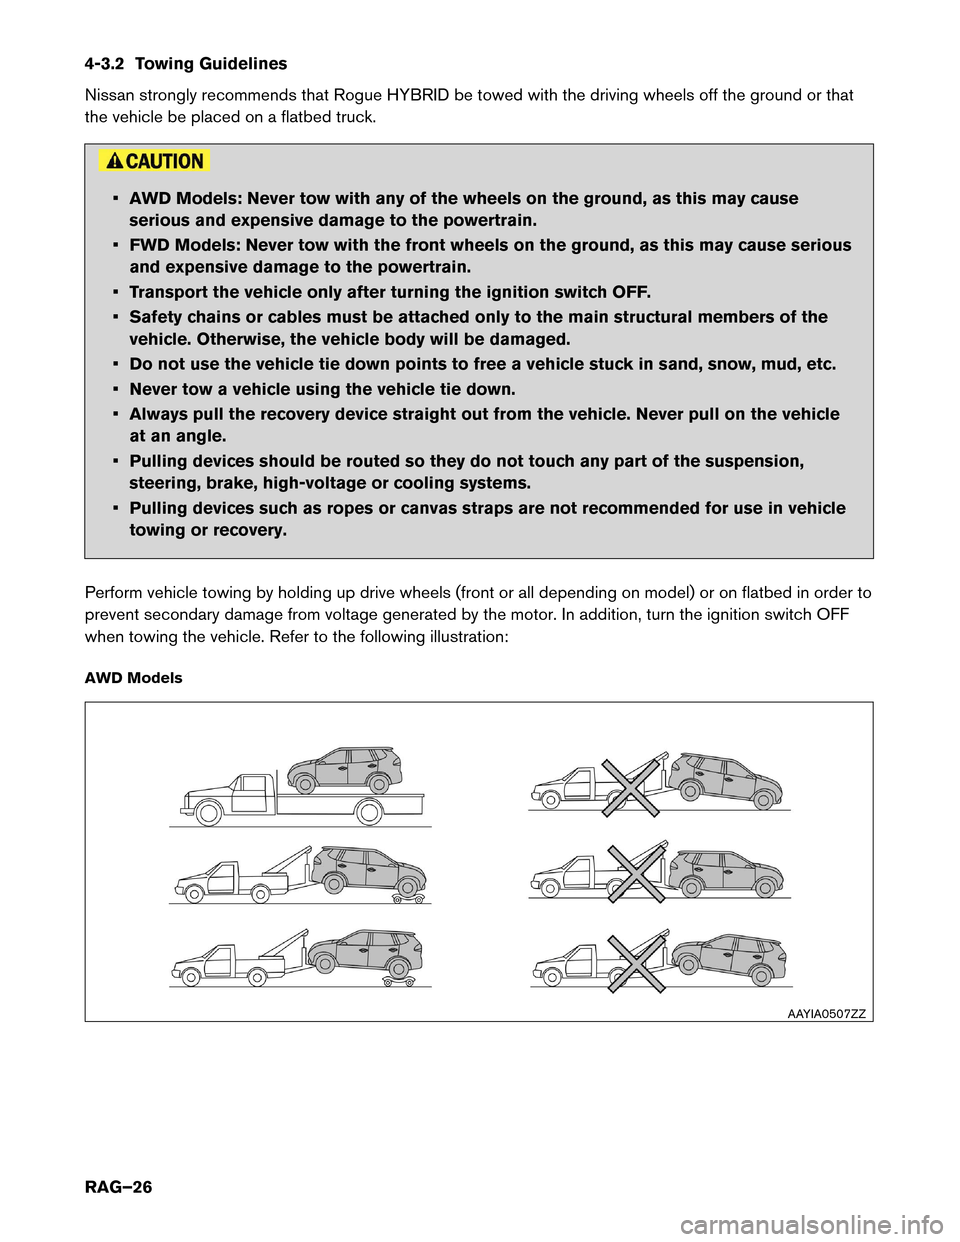 NISSAN ROGUE HYBRID 2017 2.G Roadside Assistance Guide 4-3.2 Towing Guidelines
Nissan
strongly recommends that Rogue HYBRID be towed with the driving wheels off the ground or that
the vehicle be placed on a flatbed truck. • AWD Models: Never tow with an